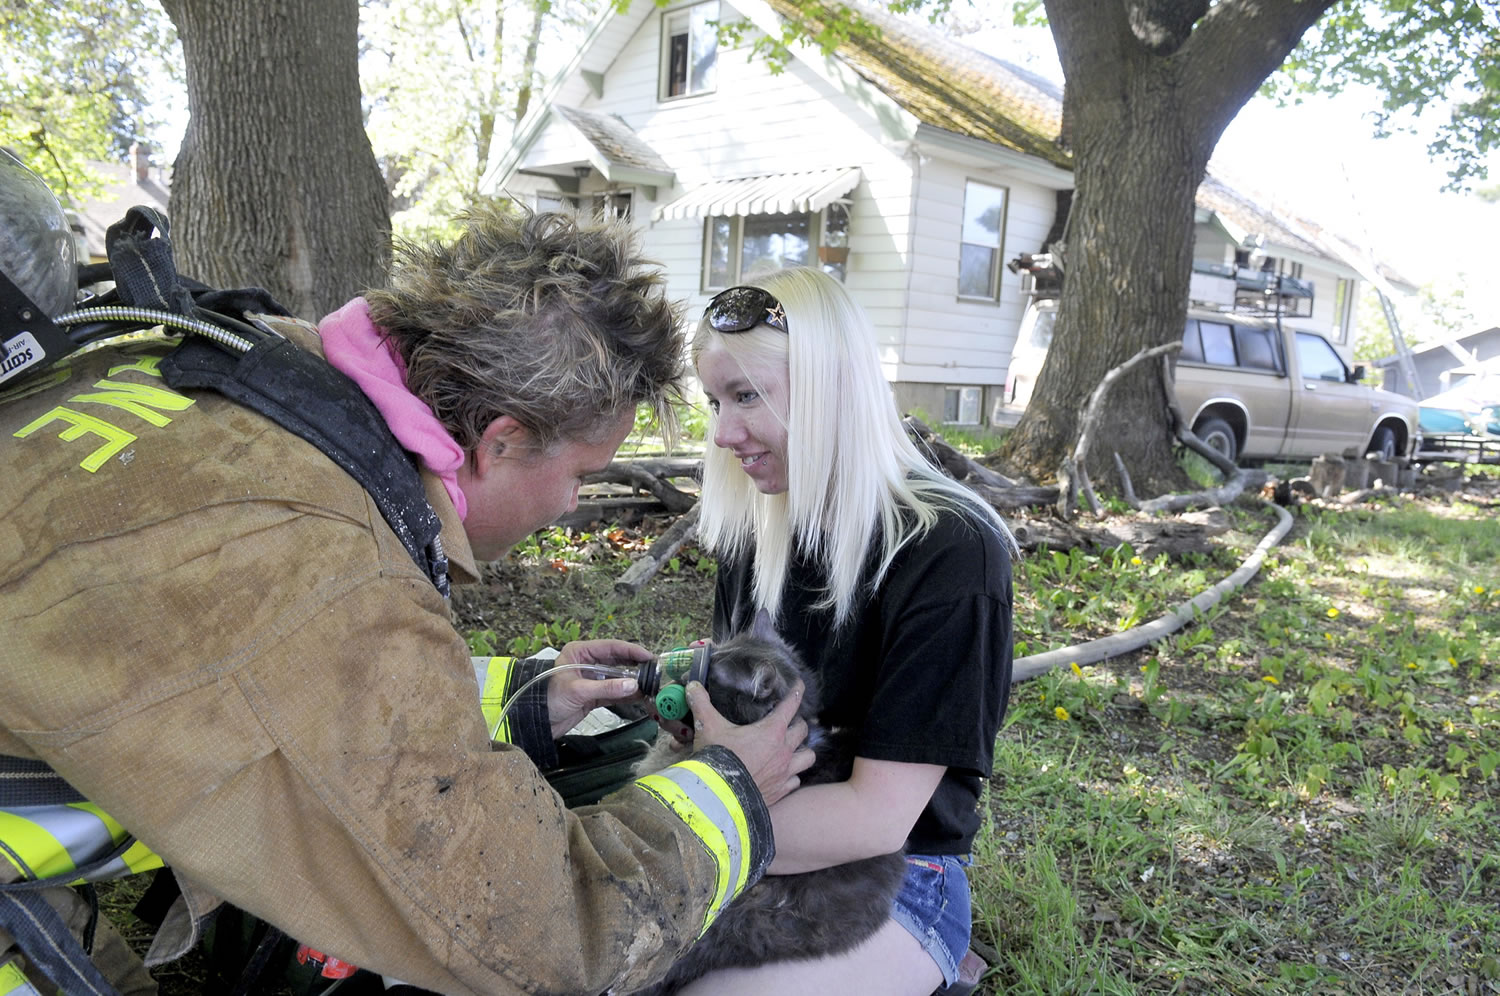 Firefighter Bridget Luby, left, holds an oxygen mask on Chief, a 10-year-old cat belonging to Haley Major, right, outside the heavily damaged house on Eighth Avenue near Napa Street in Spokane on Thursday.